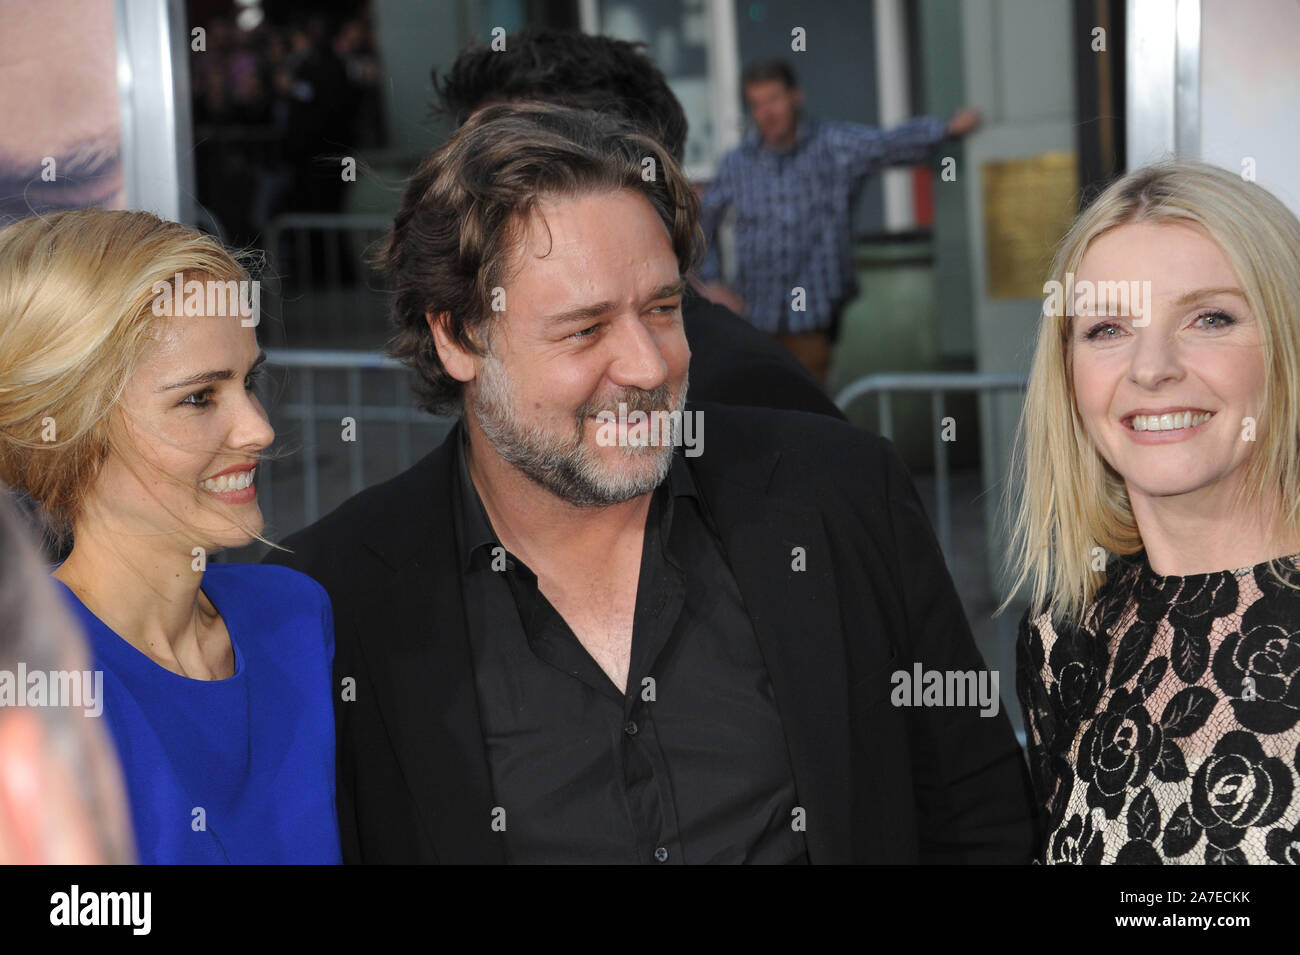 LOS ANGELES, CA - APRIL 16, 2015: Russell Crowe, Isabel Lucas & Jacqueline McKenzie (right) at the Los Angeles premiere of their movie 'The Water Diviner' at the TCL Chinese Theatre, Hollywood. © 2015 Paul Smith / Featureflash Stock Photo